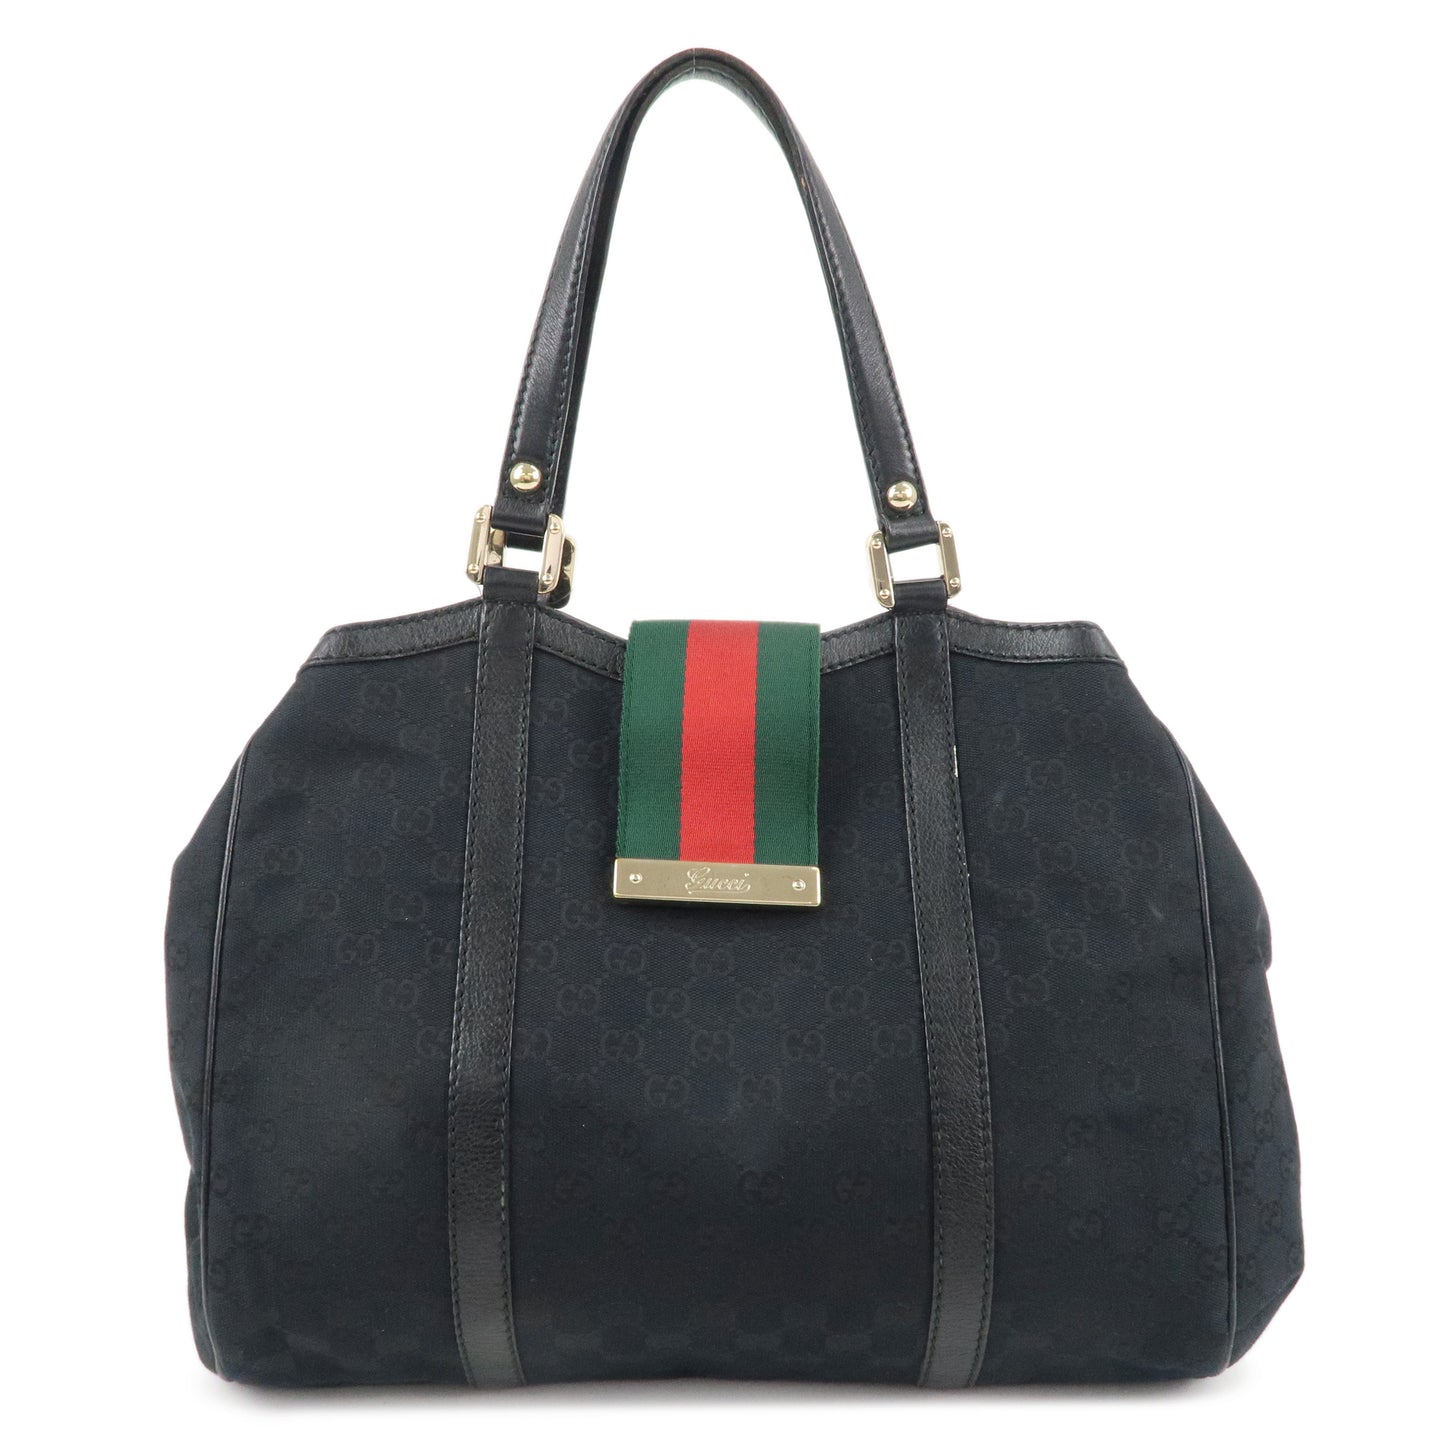 GUCCI Sherry GG Canvas Leather Hand Bag Black 233609